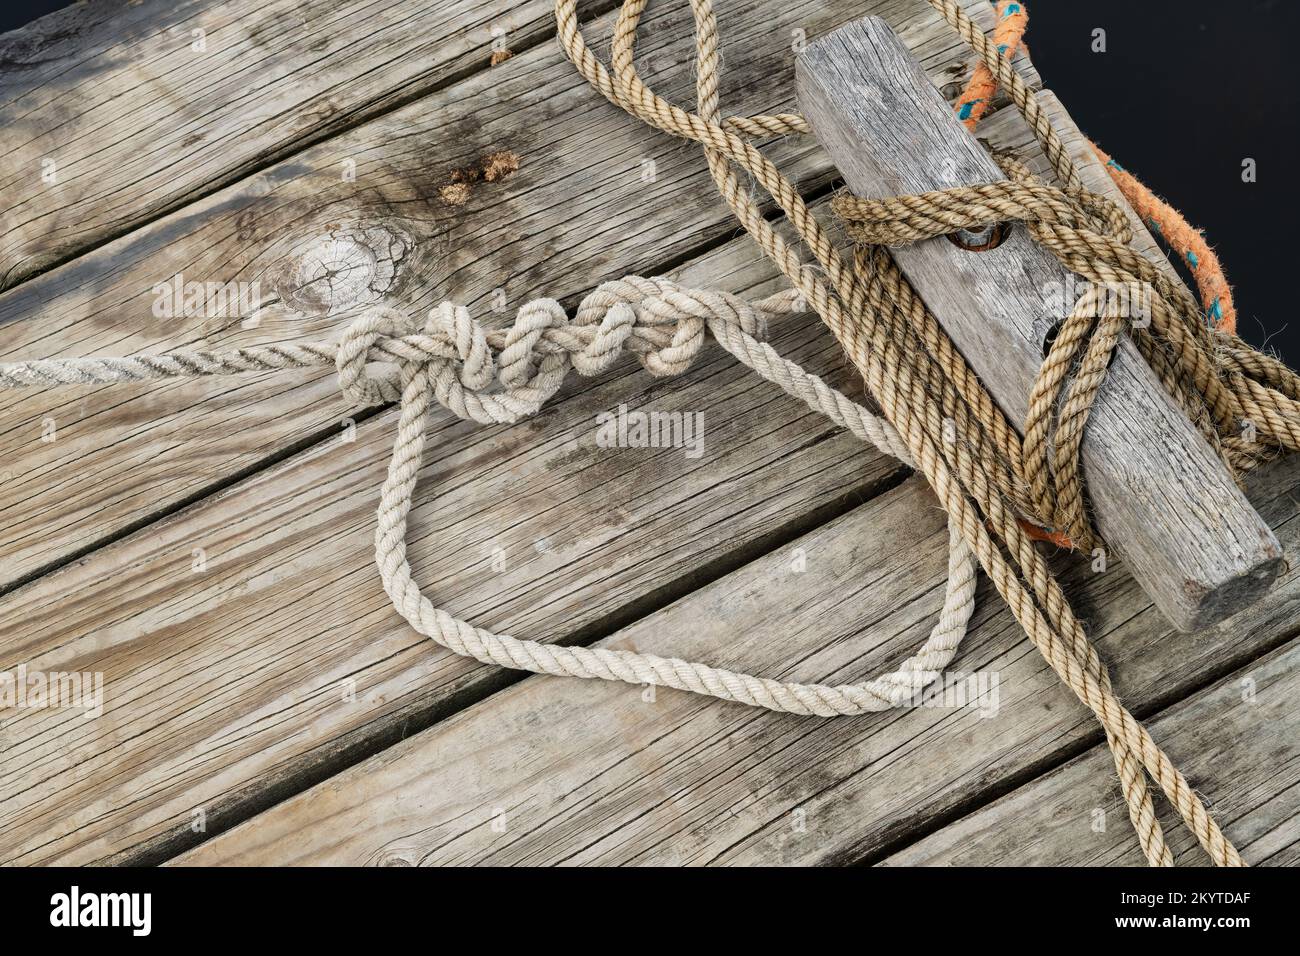 An old wooden jetty with ropes from boats attached to the mooring point, Stock Photo